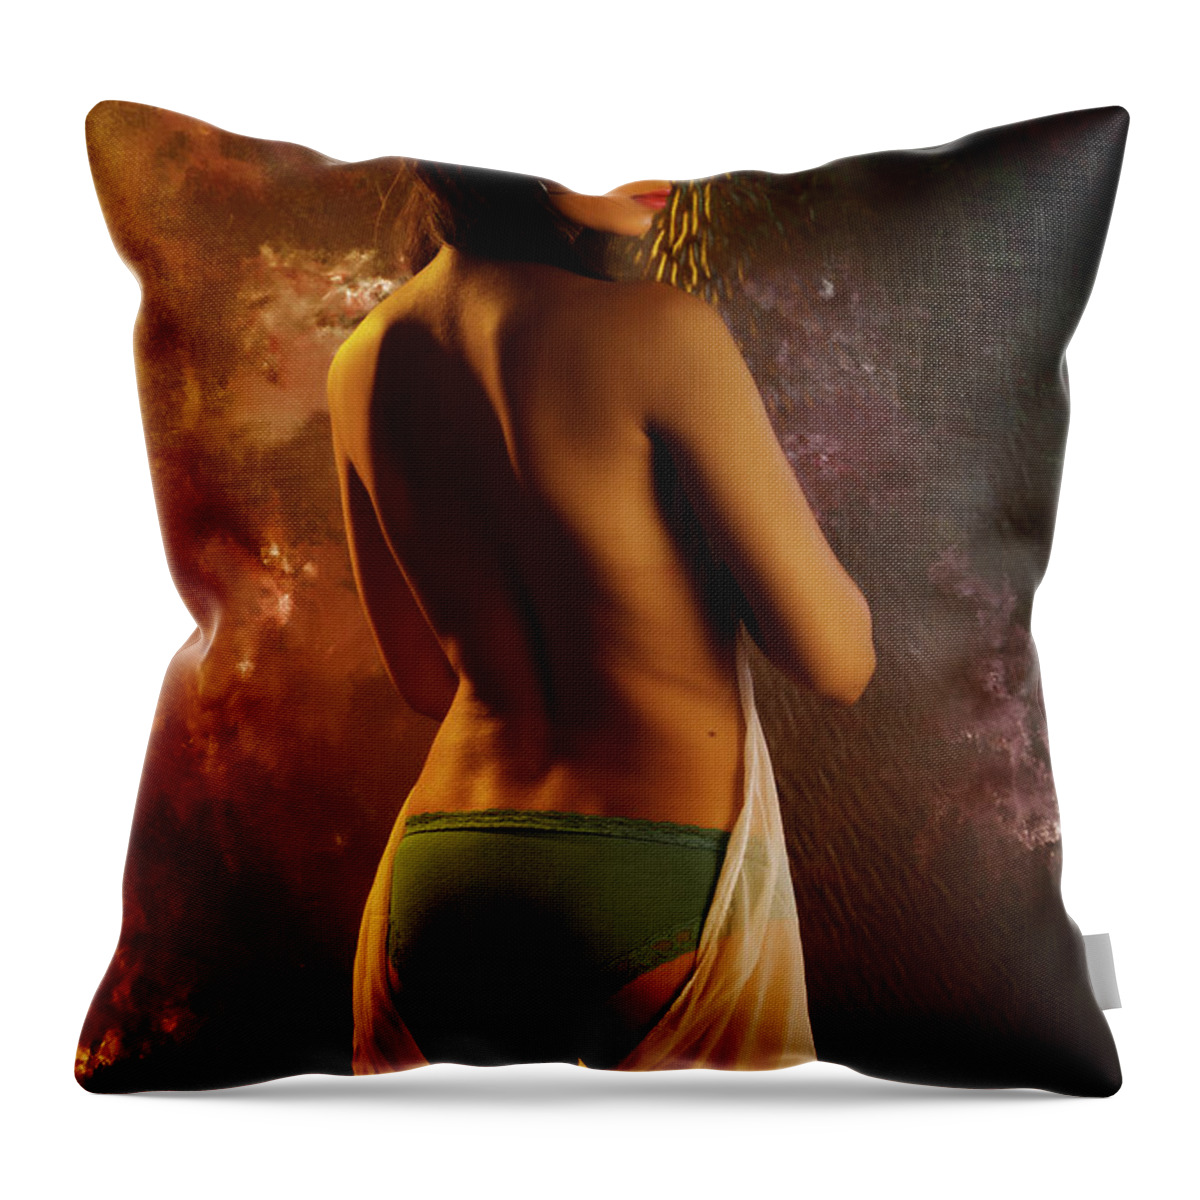 Seductive Throw Pillow featuring the photograph Topless nude showing back by Kiran Joshi